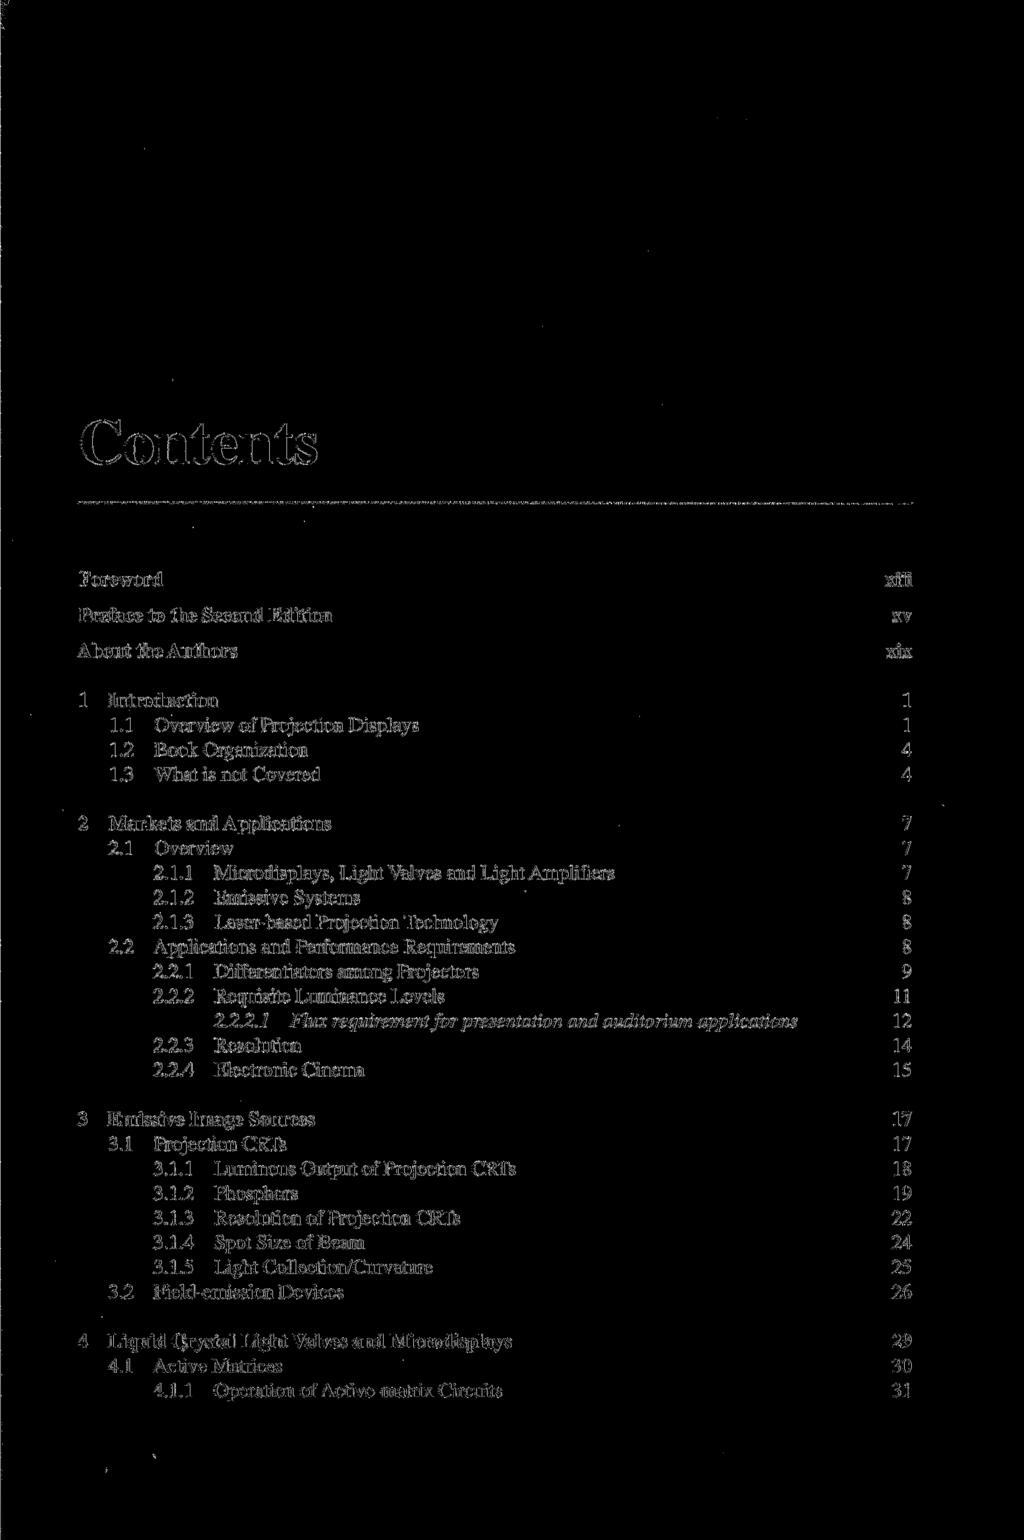 Contents Foreword Preface to the Second Edition About the Authors xiii xv xix 1 Introduction 1 1.1 Overview of Projection Displays 1 1.2 Book Organization 4 1.